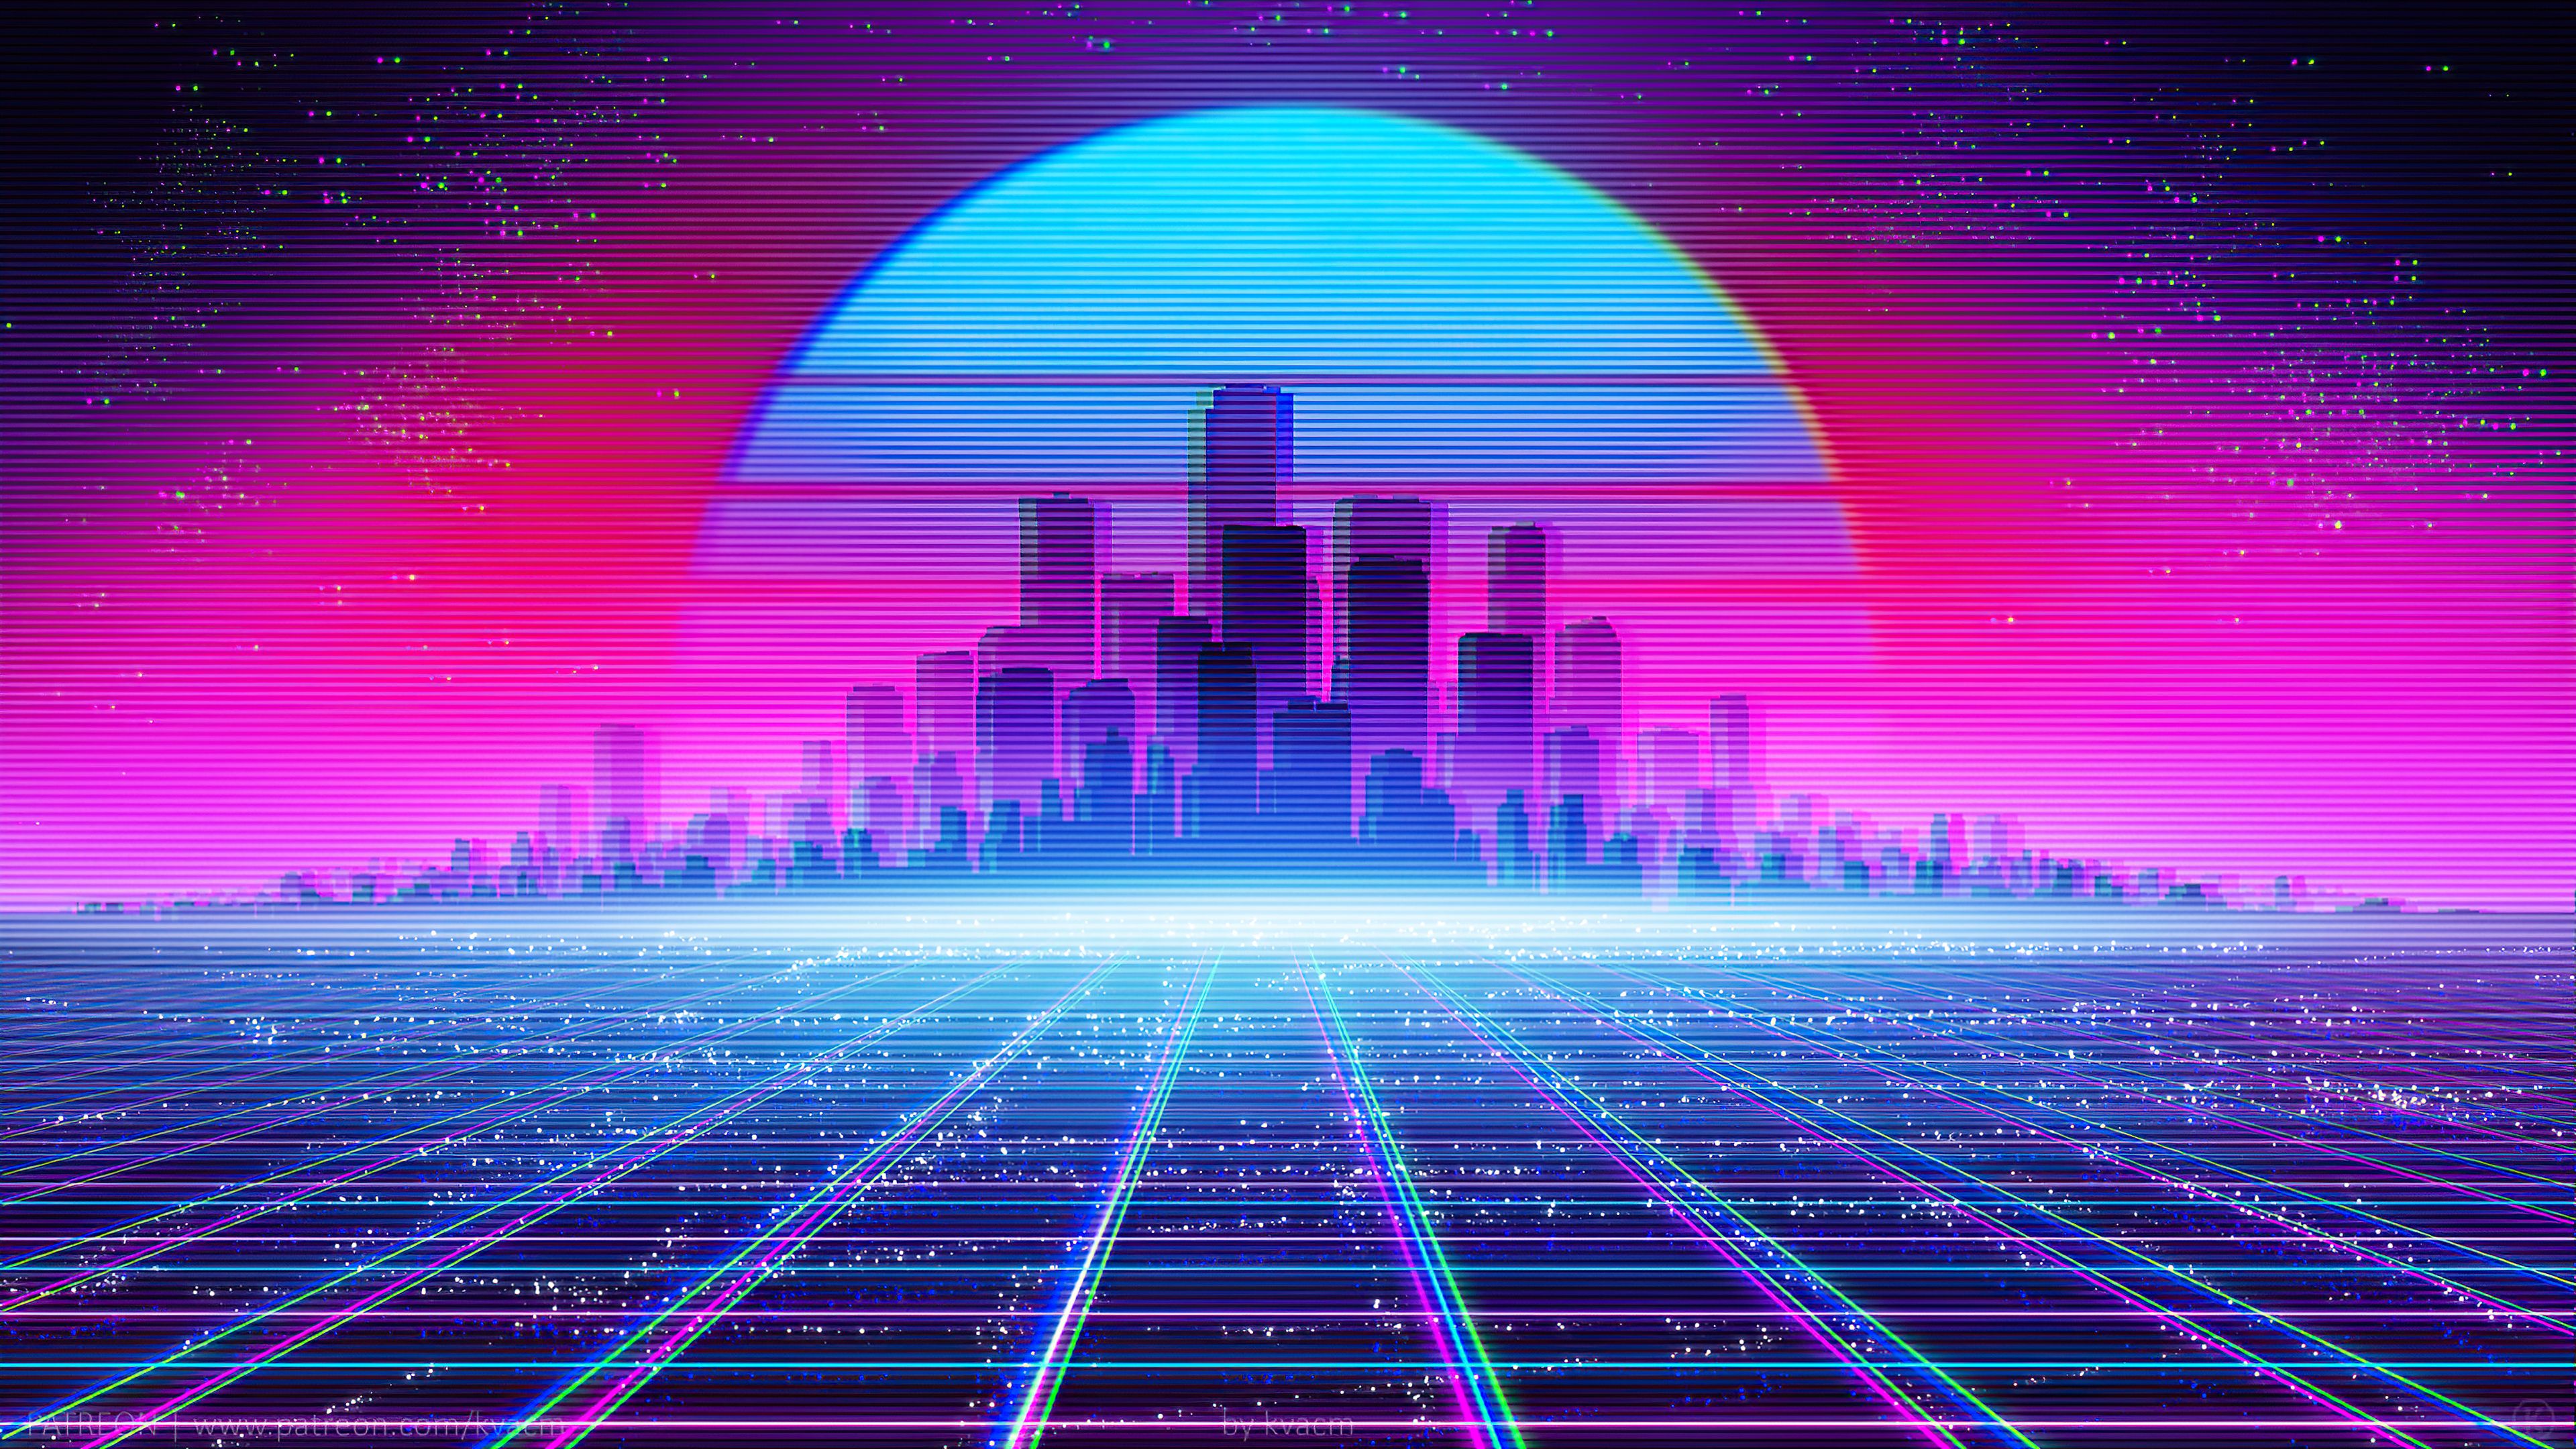 A retro city in the future with neon lights - Synthwave